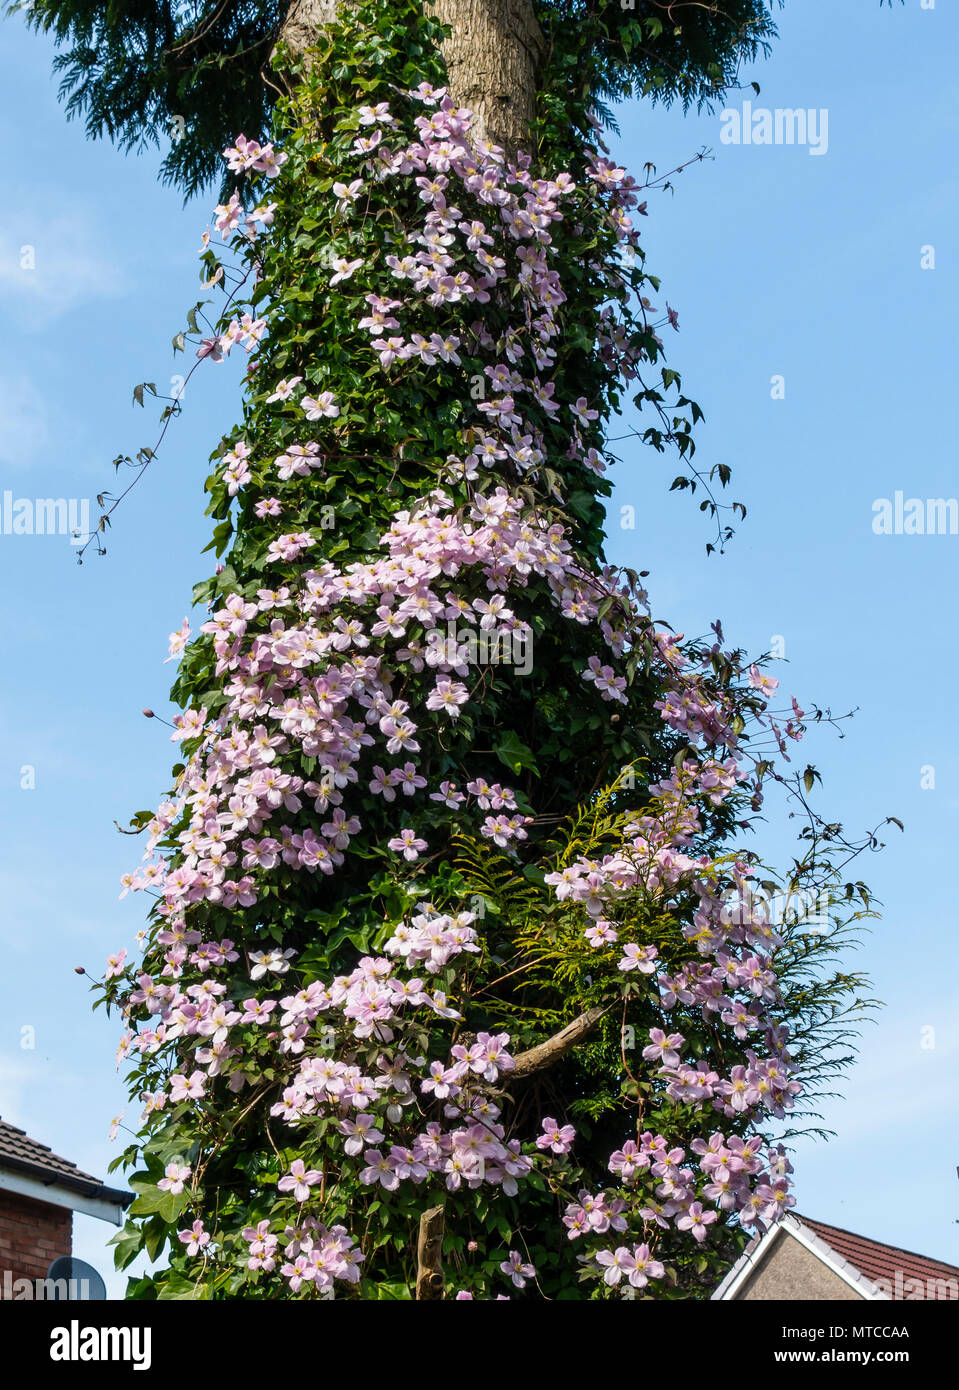 Clematis montana var rubens, a self-clinging climber which flowers in late spring, flowering around the trunk of a conifer tree, with a blue sky backg Stock Photo